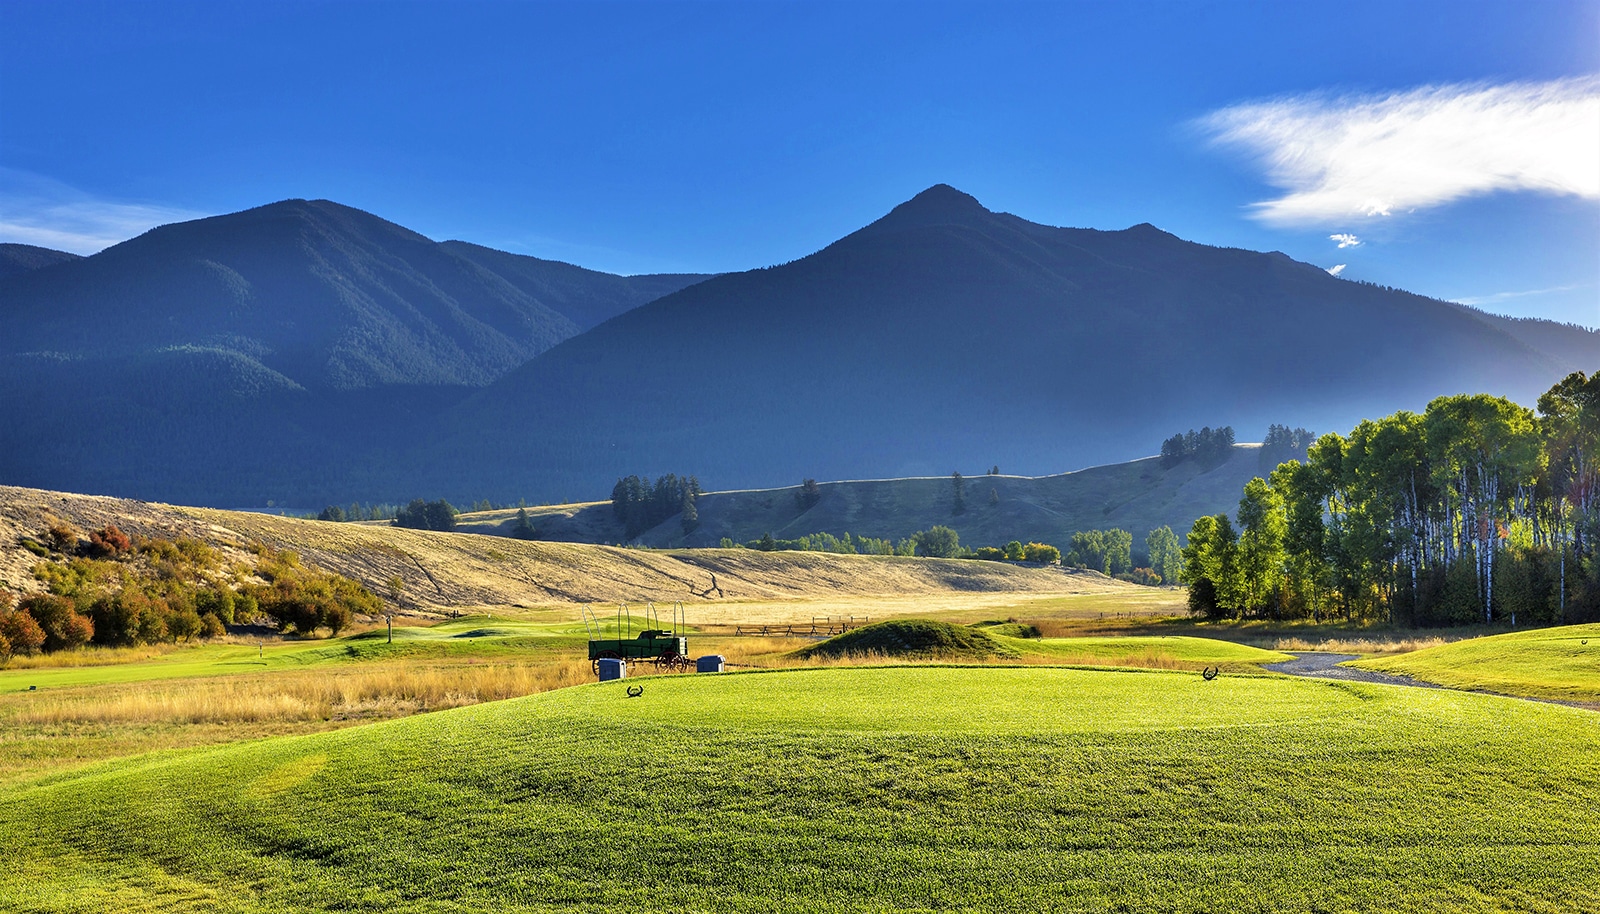 Golf course with mountains in background.